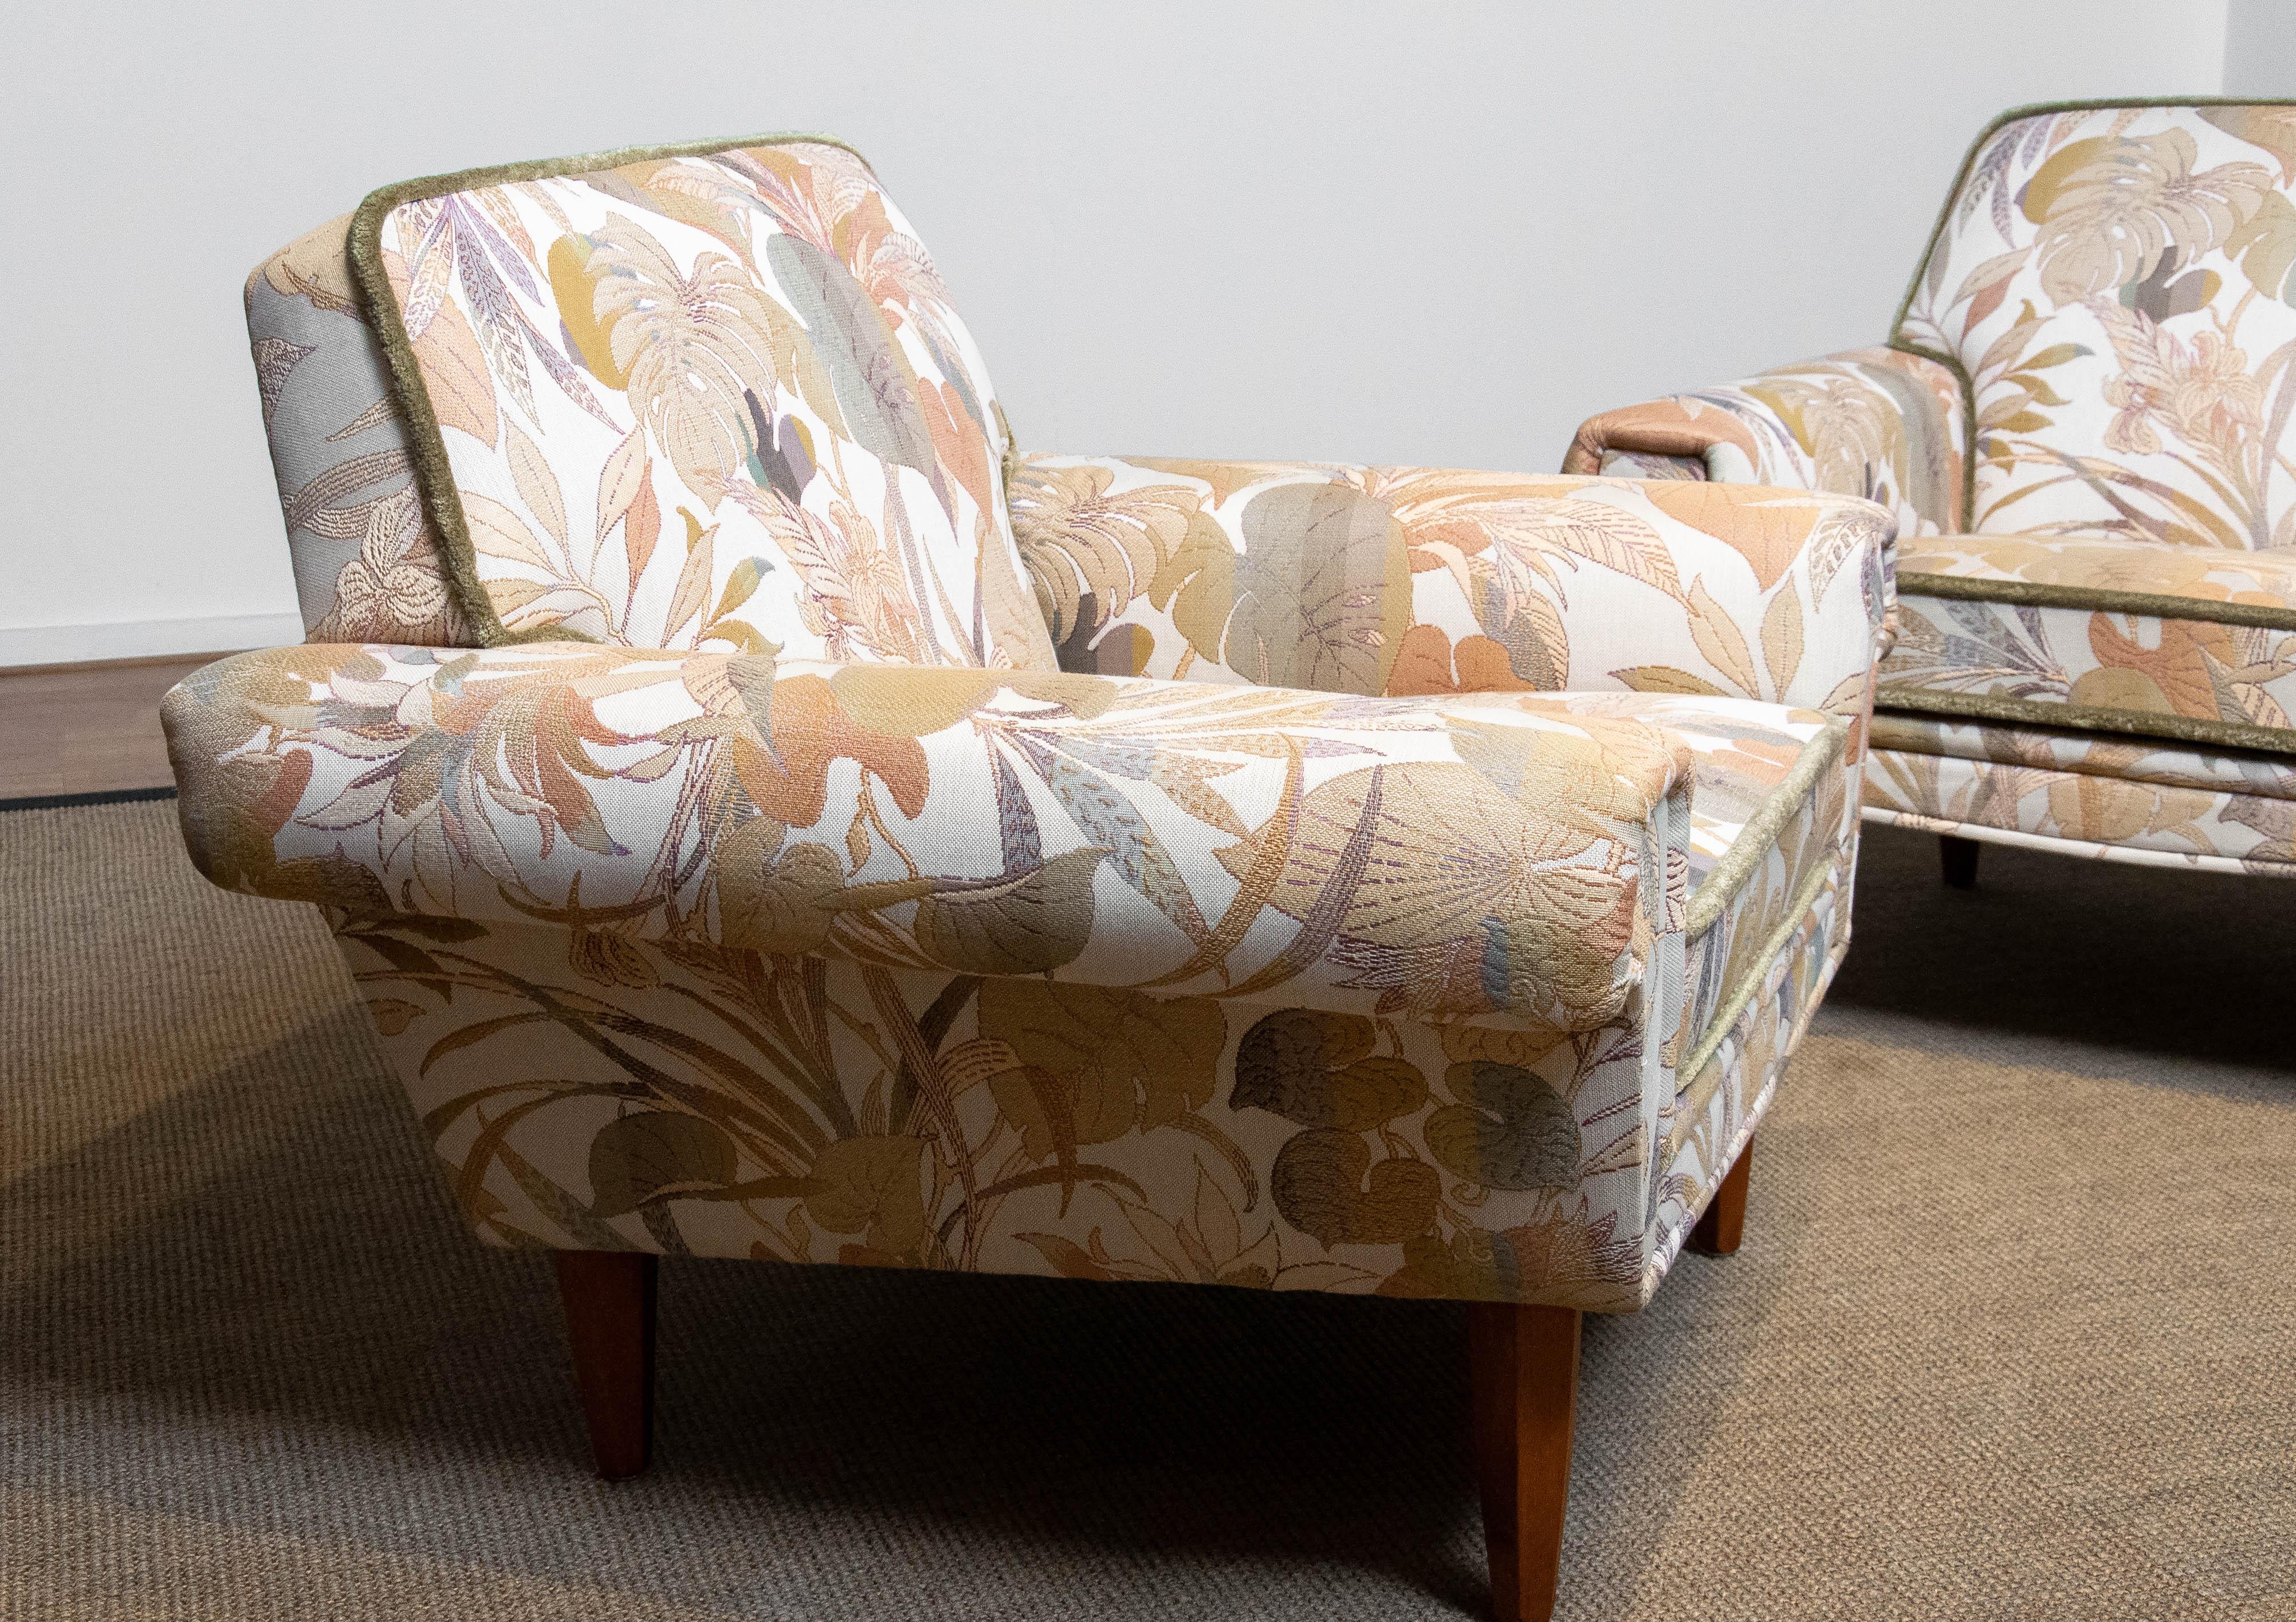 Mid-20th Century Pair Low Back Lounge Chairs Upholstered Floral Jacquard Fabric From Denmark 1970 For Sale